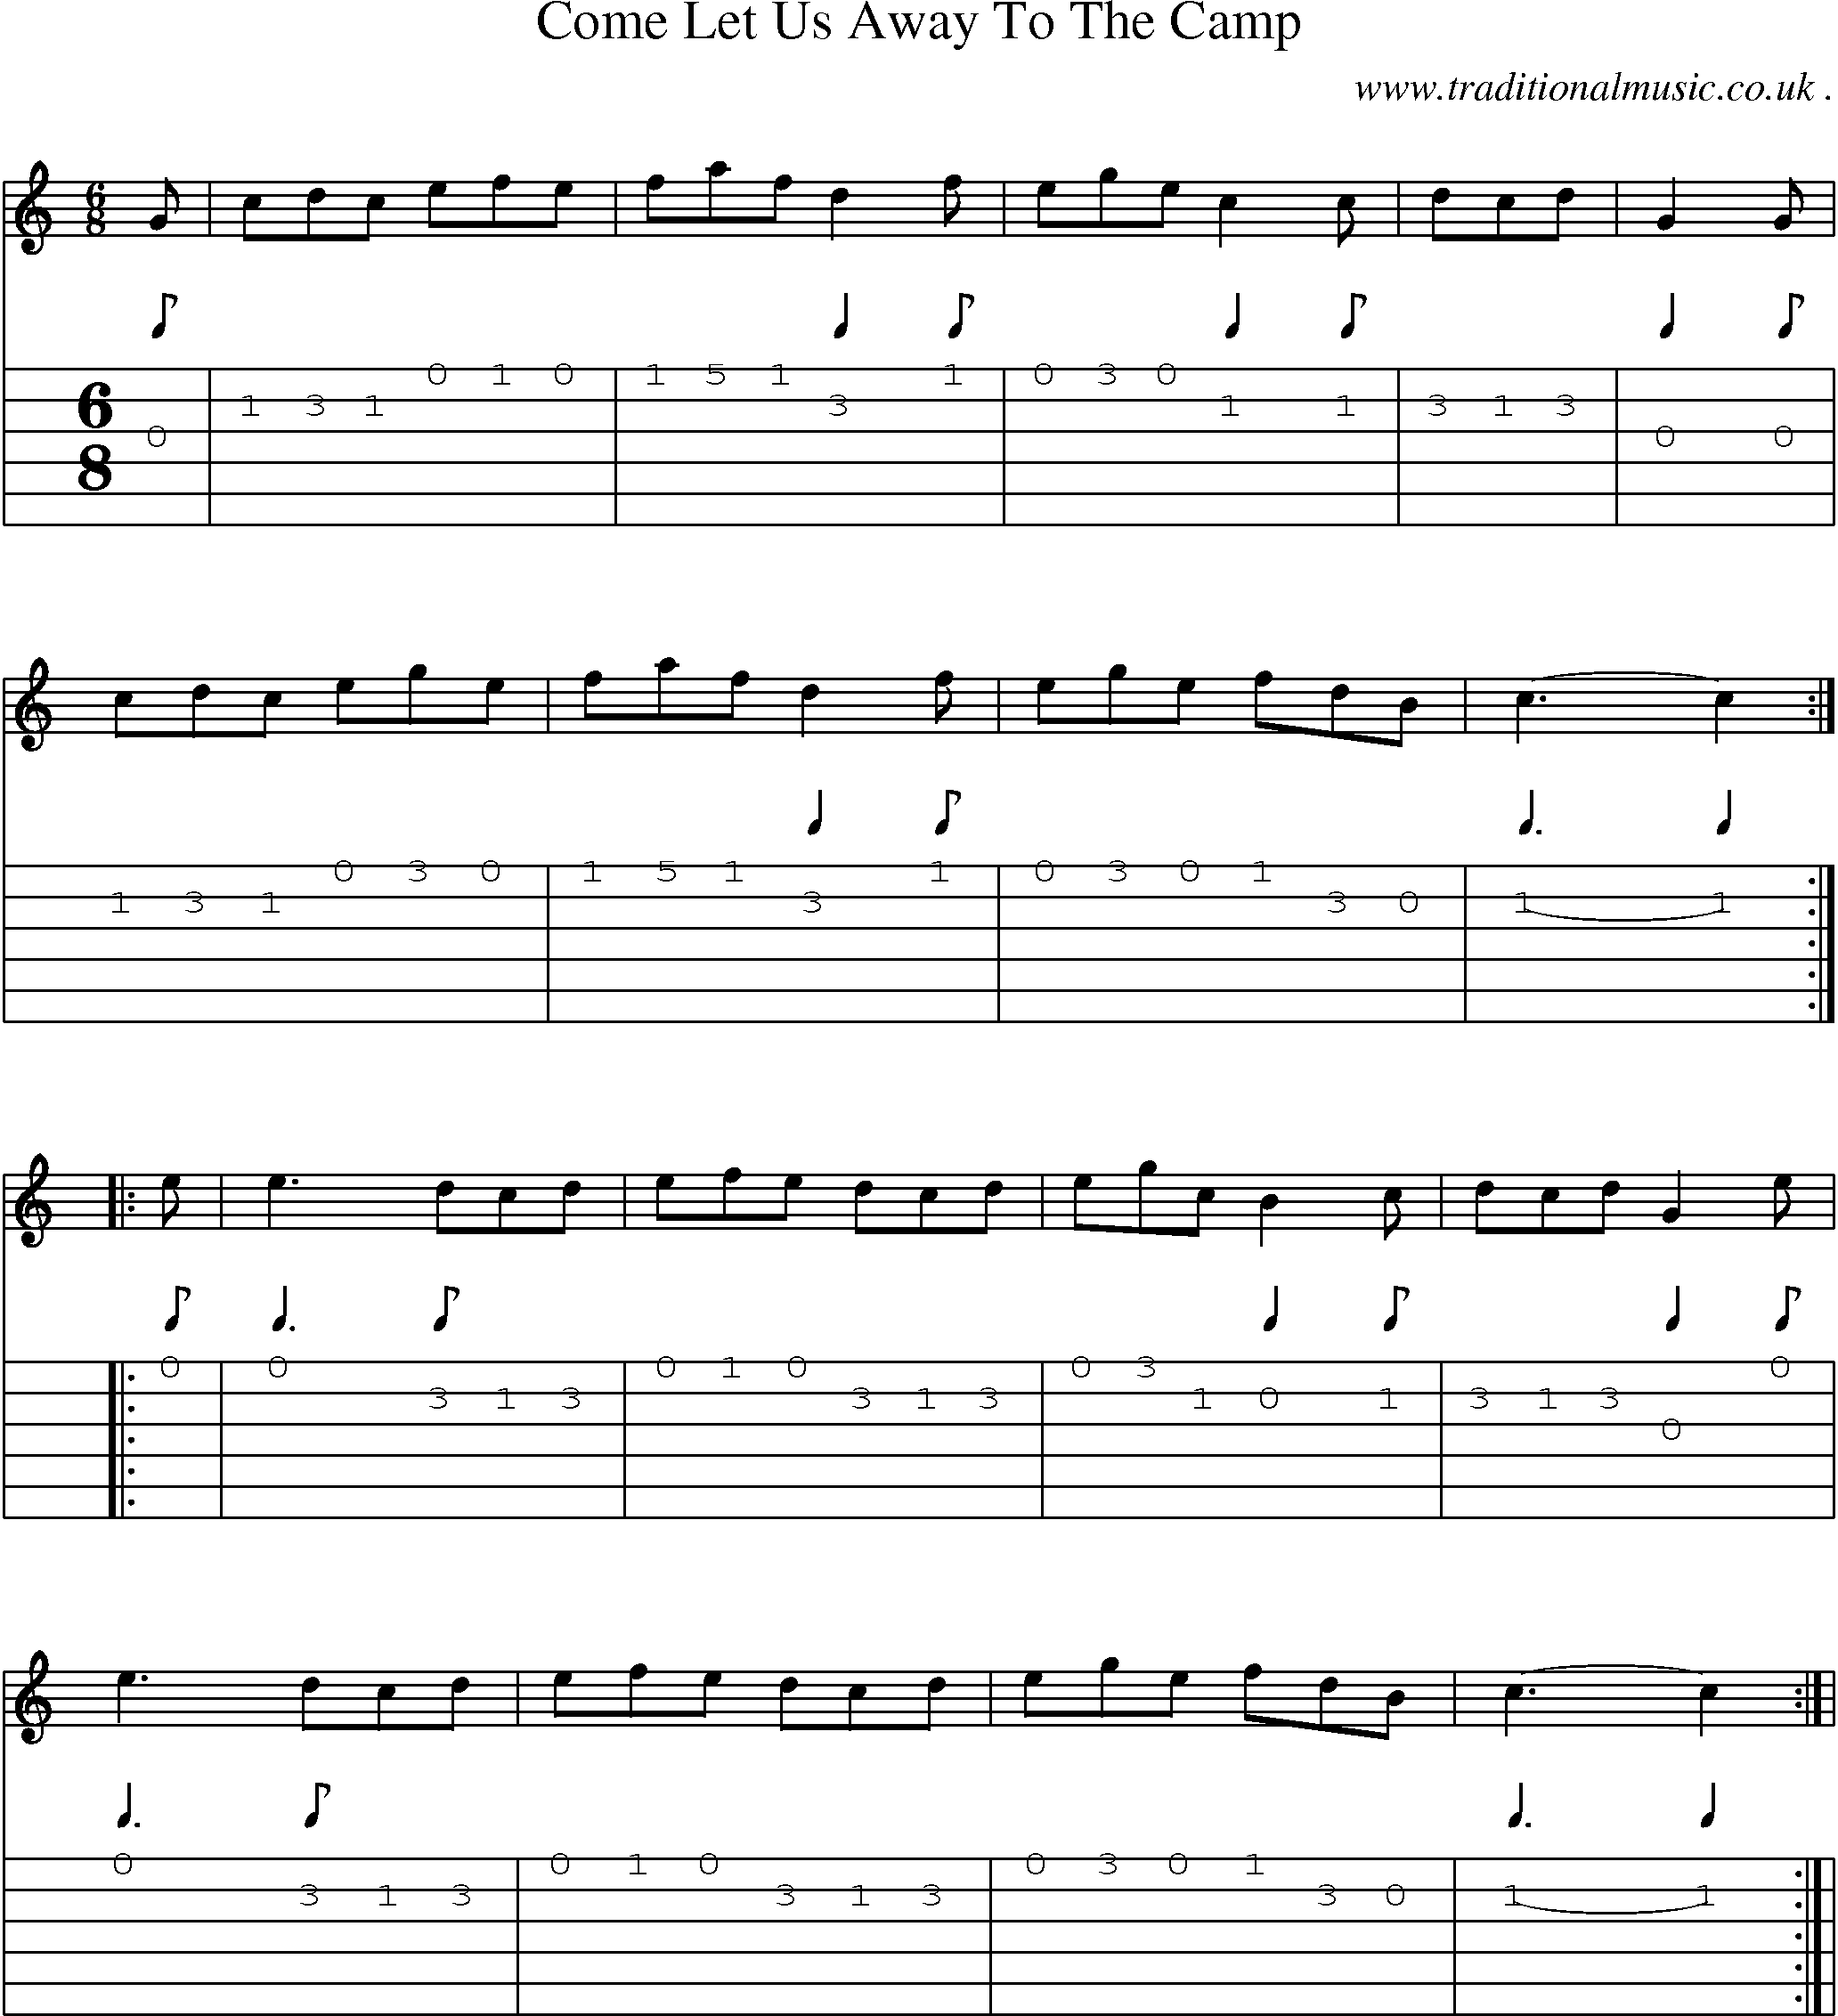 Sheet-Music and Guitar Tabs for Come Let Us Away To The Camp